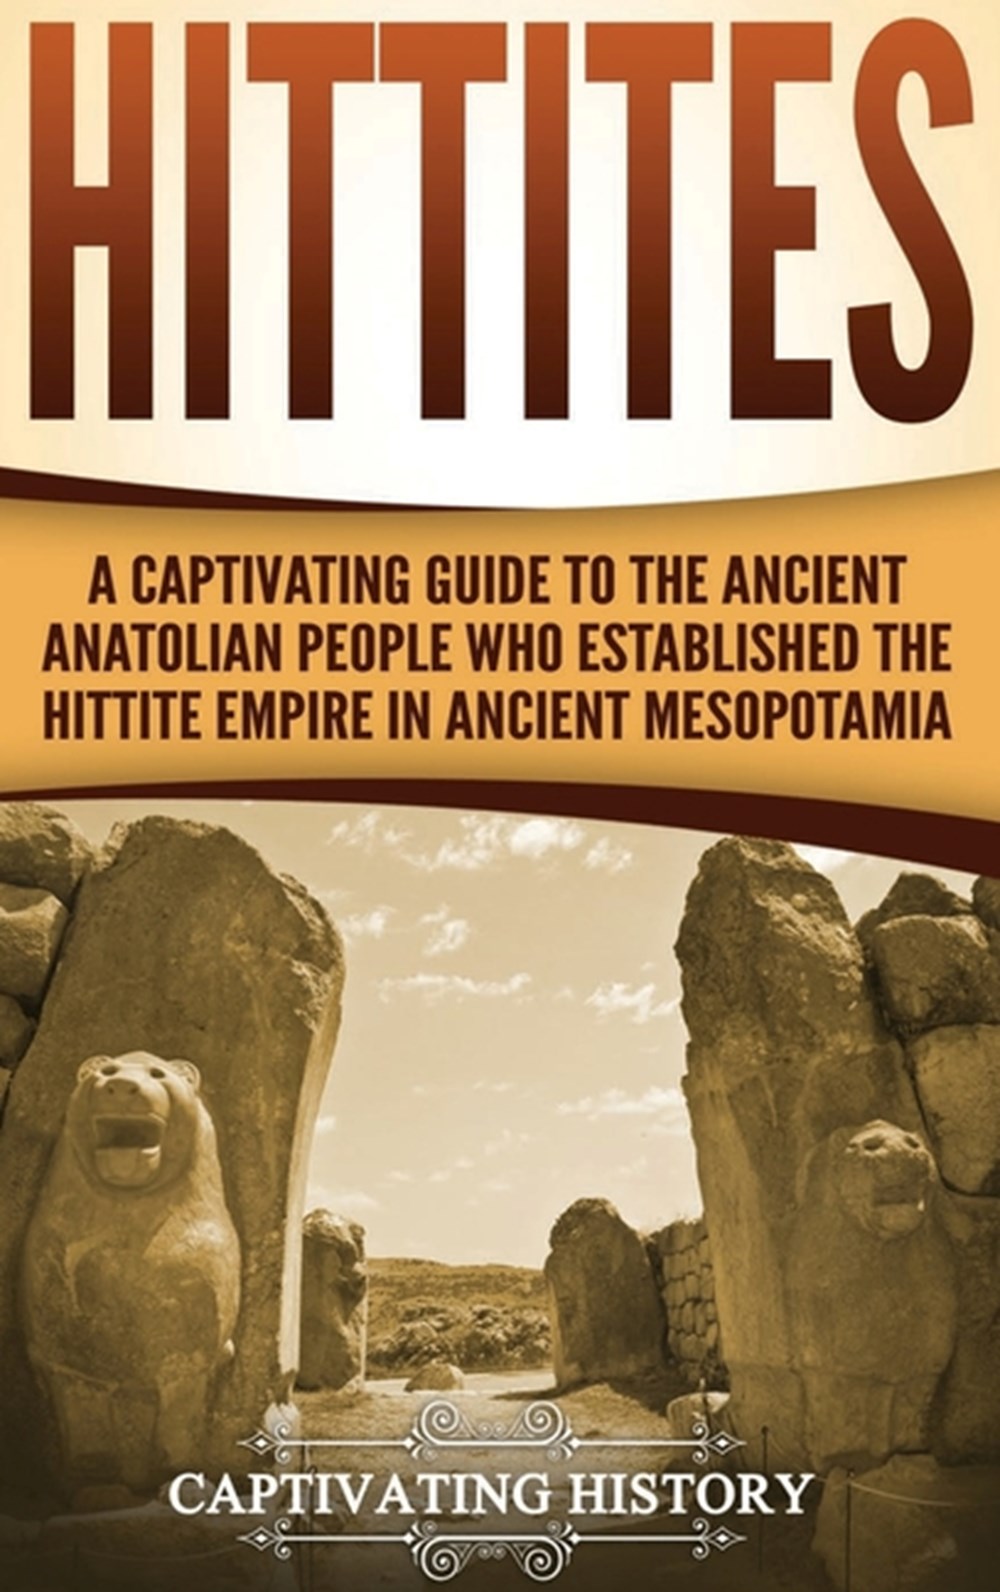 Hittites: A Captivating Guide to the Ancient Anatolian People Who Established the Hittite Empire in 